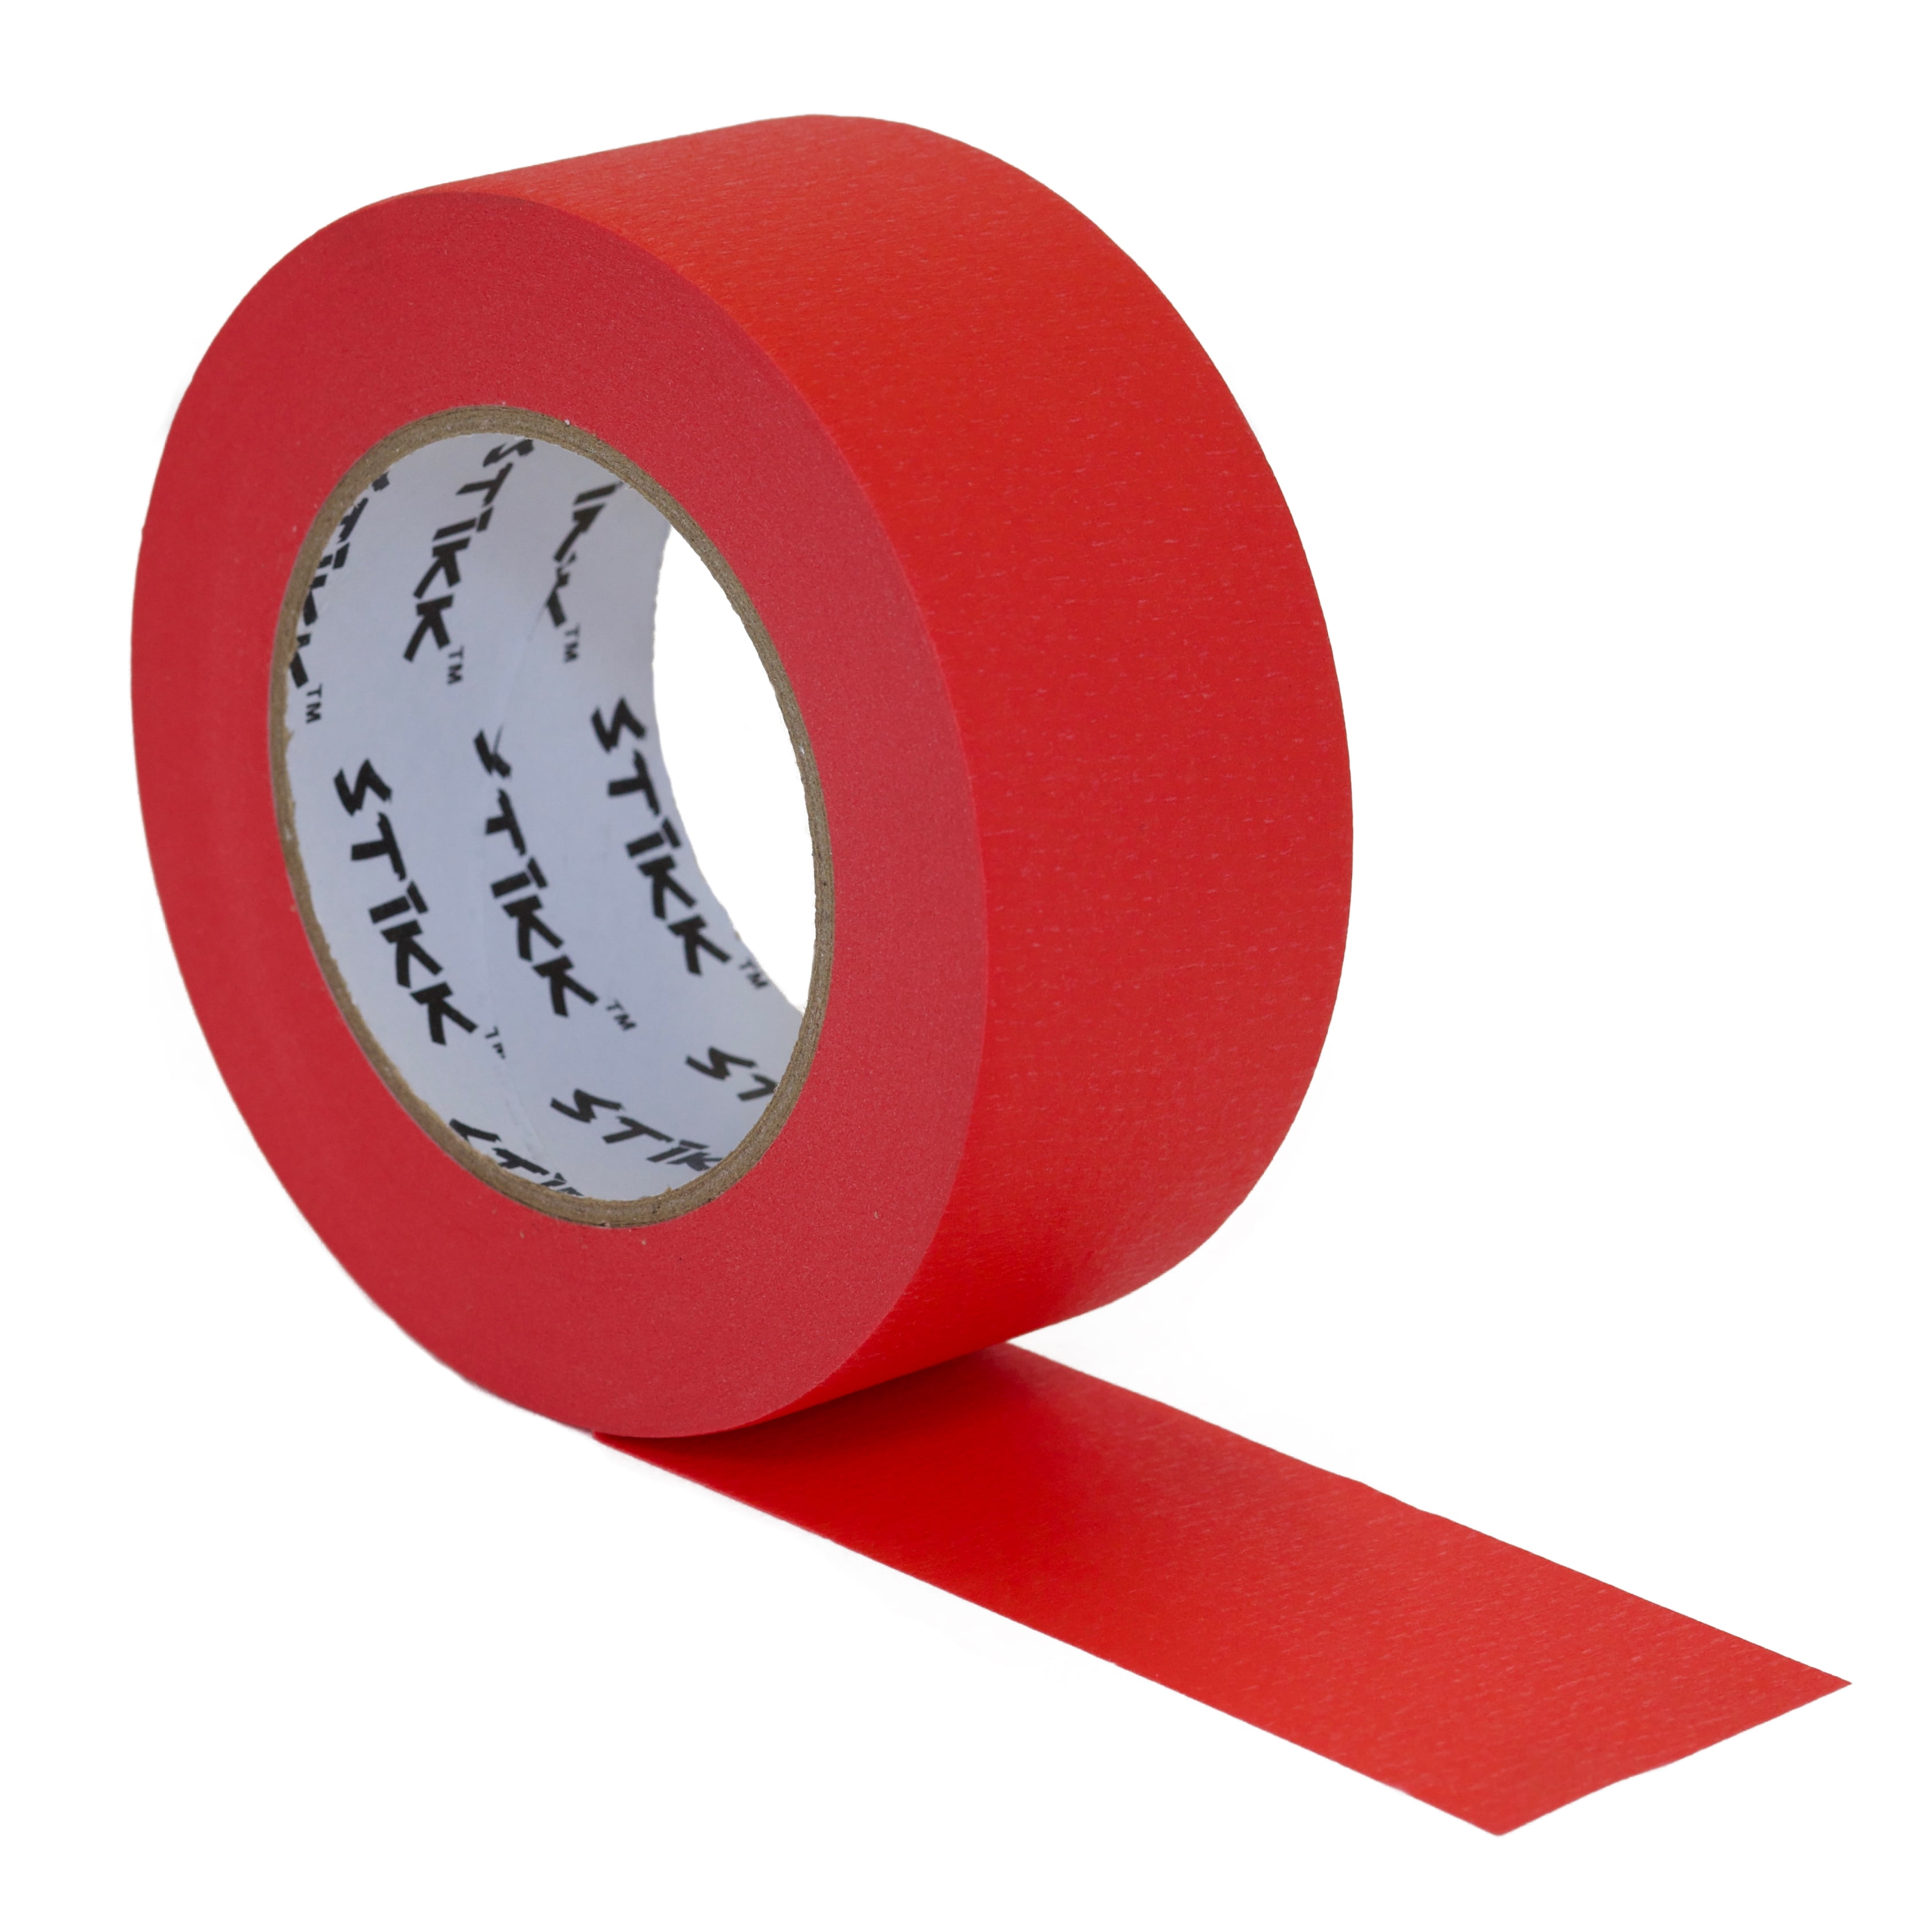 Baijixin 3 Rolls Red Masking Tape, Red Painters Tape for Home, Office,  School St